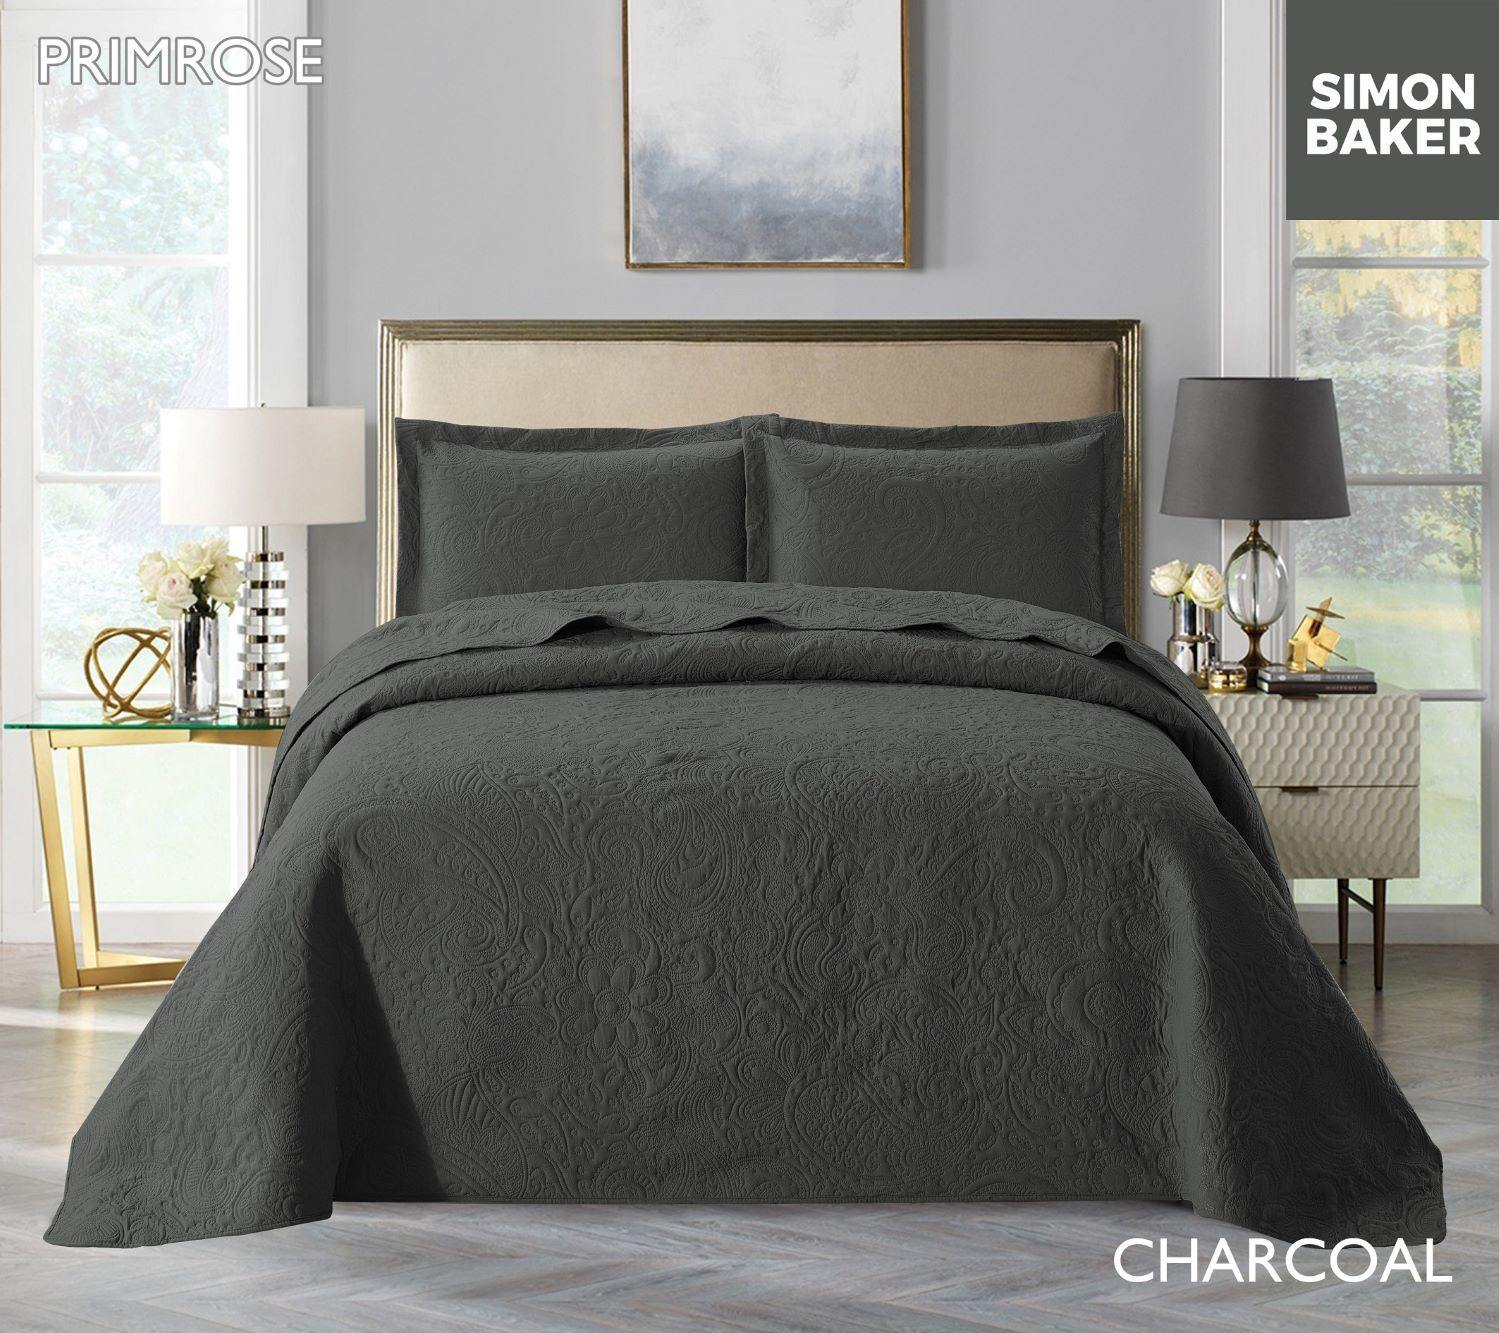 Simon Baker | Primrose Quilted Bedspread Charcoal (Various Sizes)